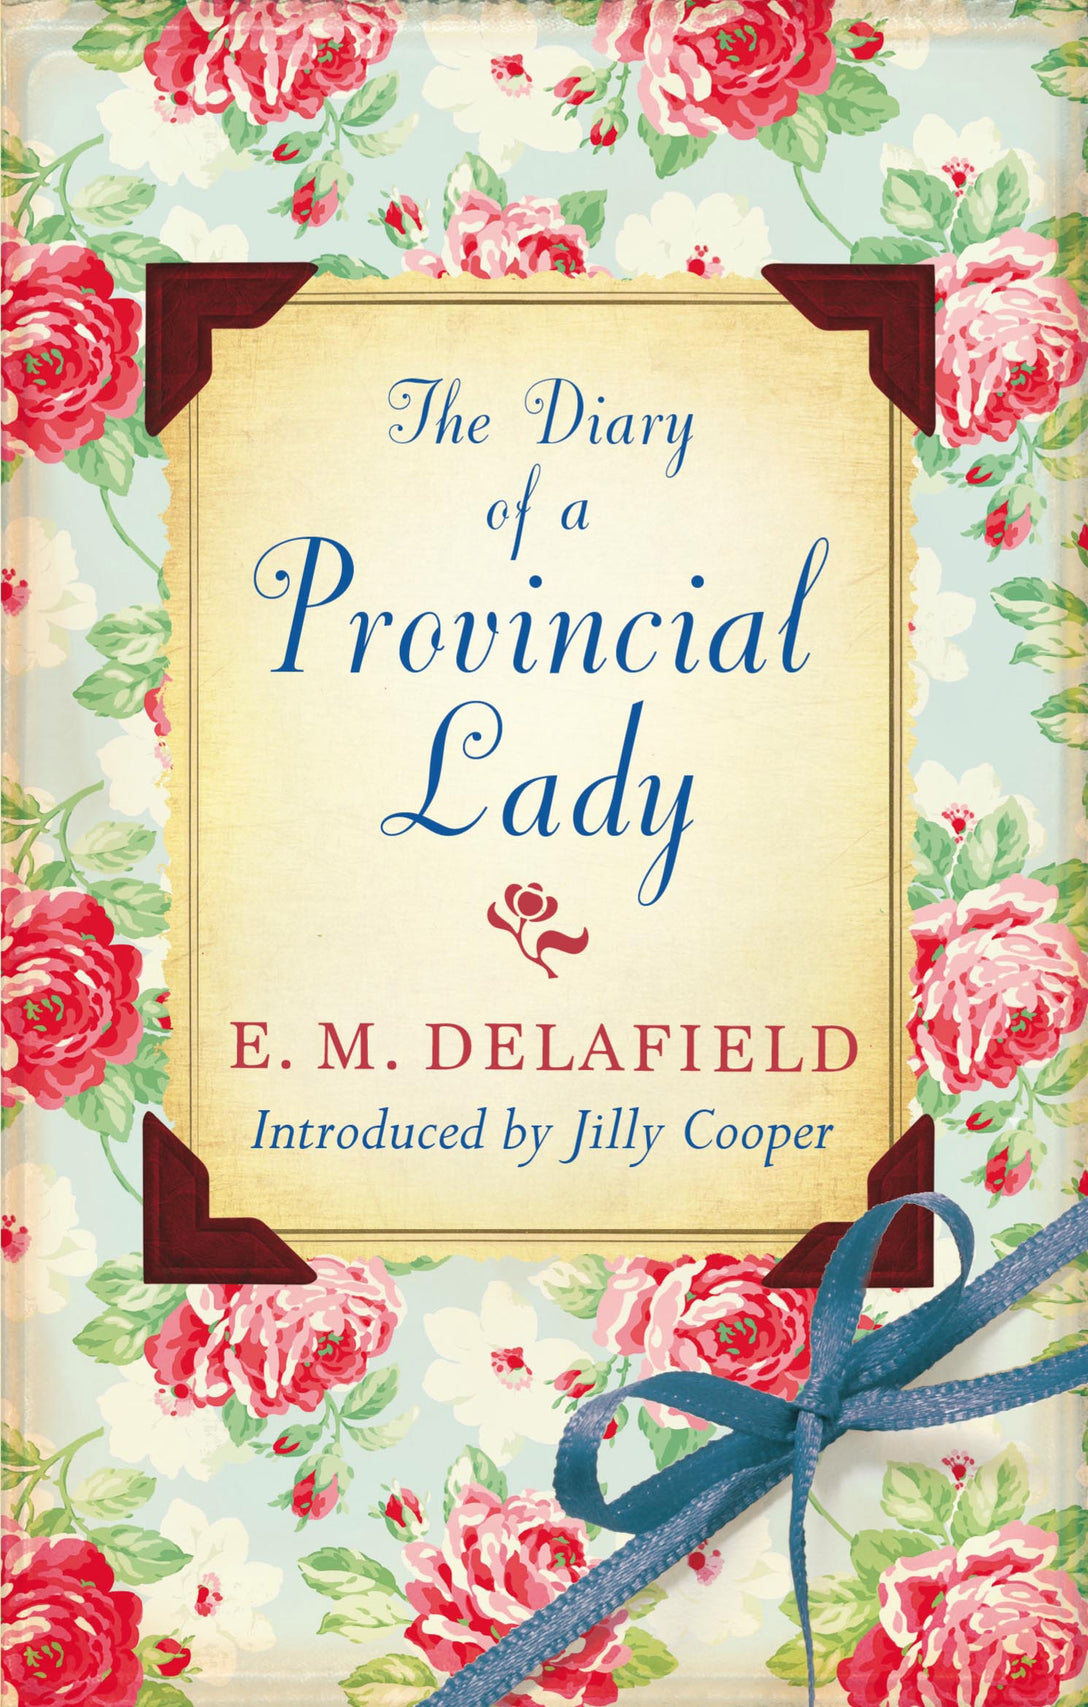 The Diary Of A Provincial Lady by E.M. Delafield